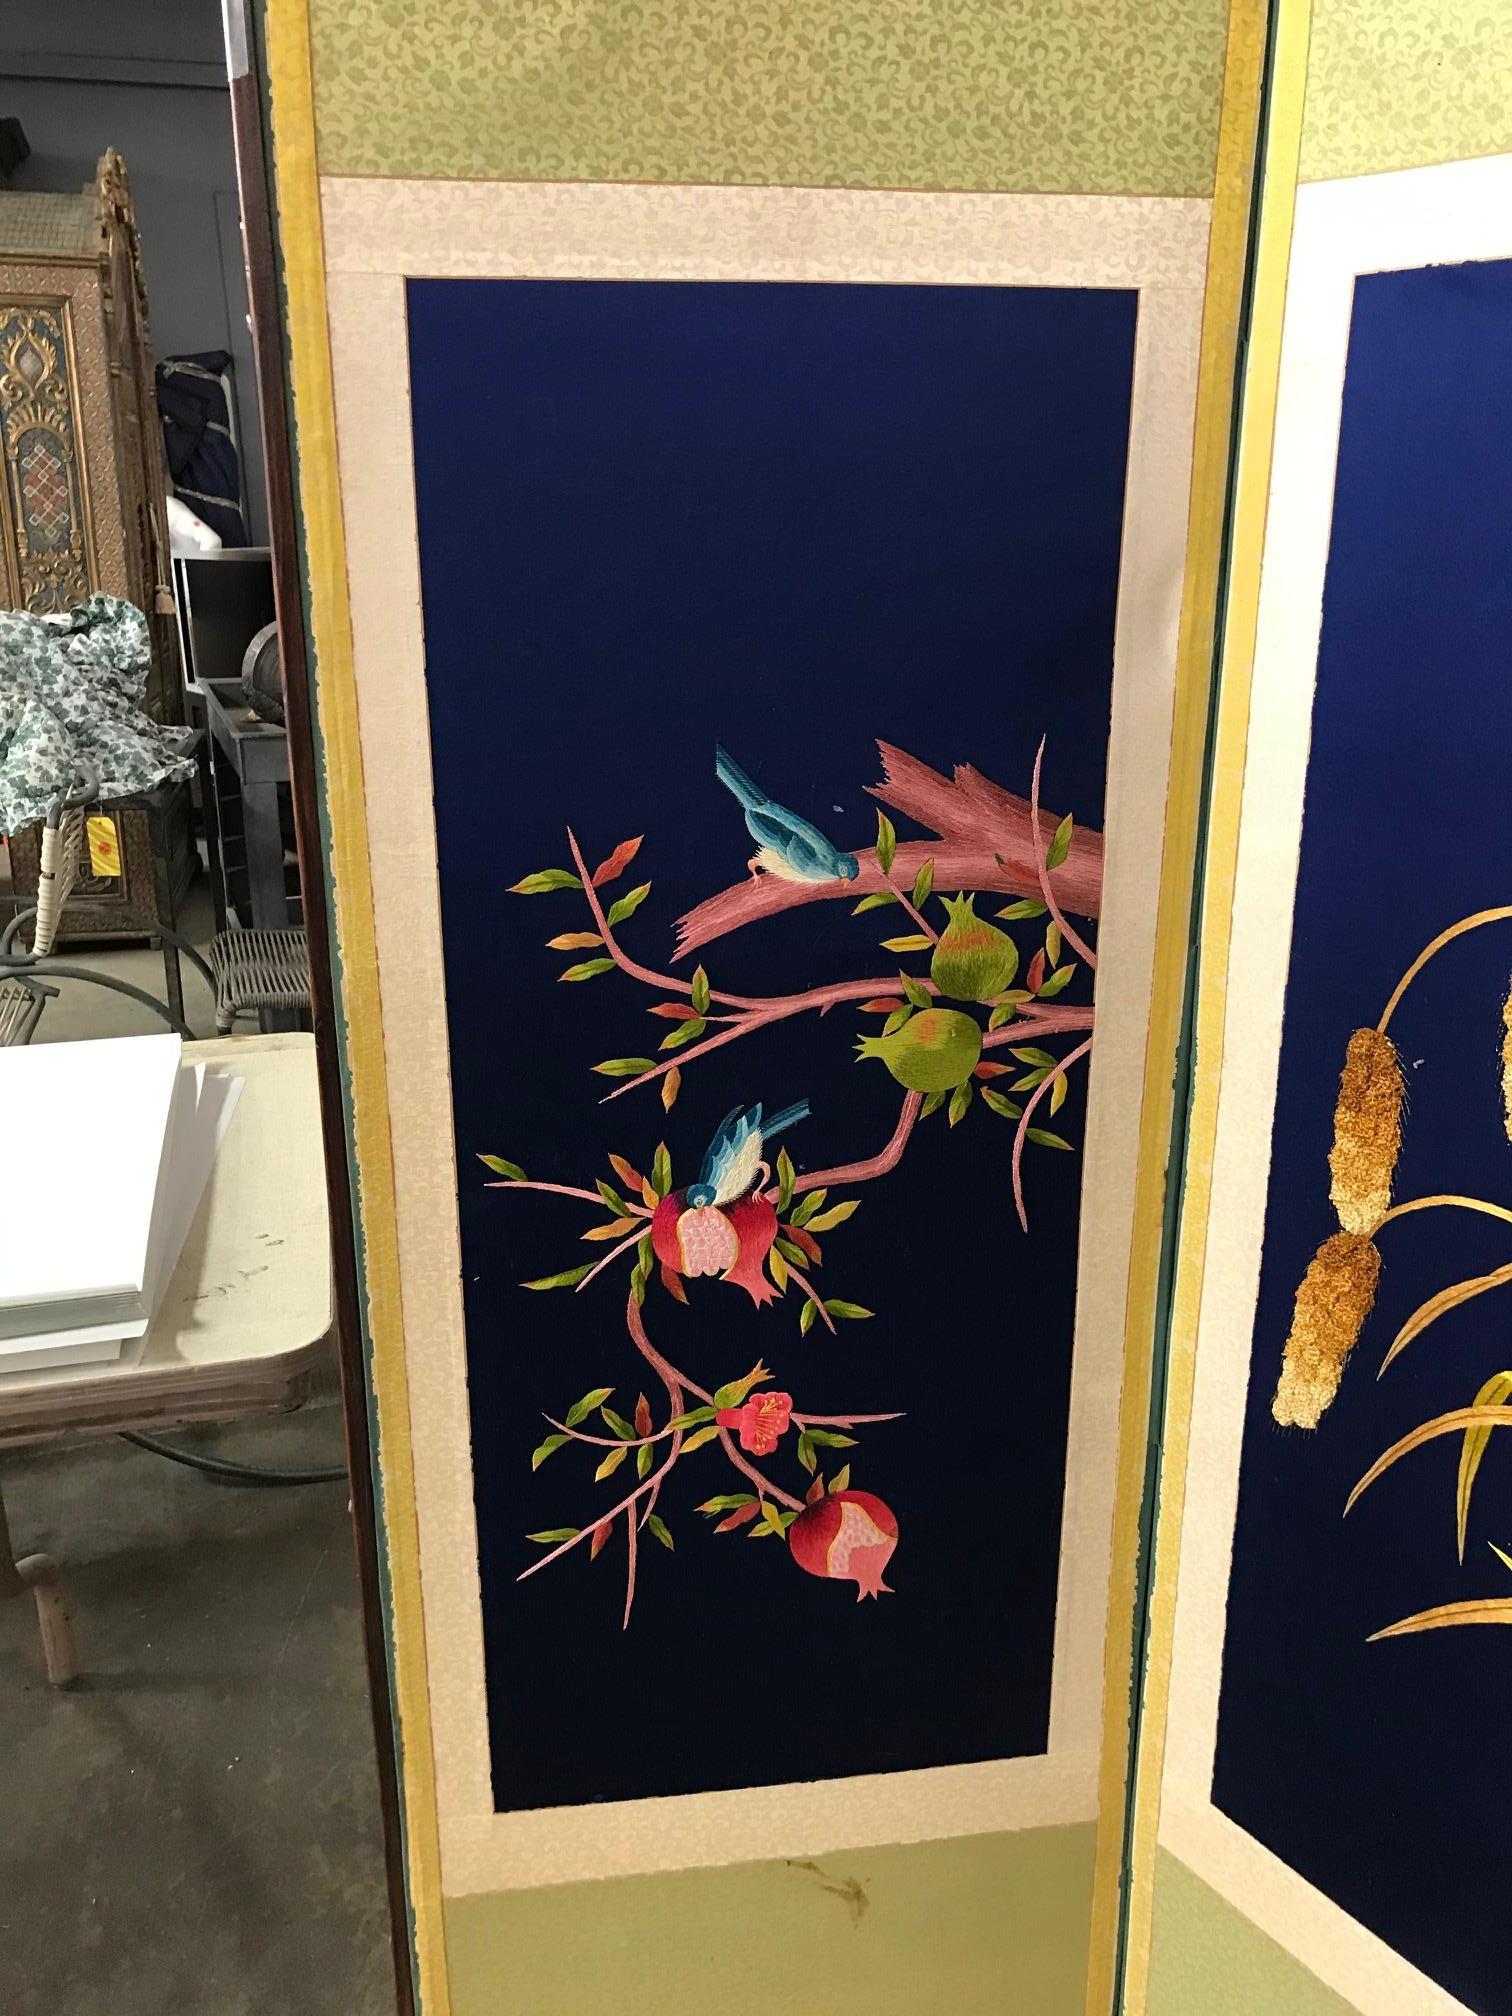 A gorgeous early to midcentury Korean embroidered eight-panel screen depicting scenic nature motifs of flowering trees, playful birds and floating butterflies. Very rare and hard to come by. The embroidery work and colors are quite stunning. 

We